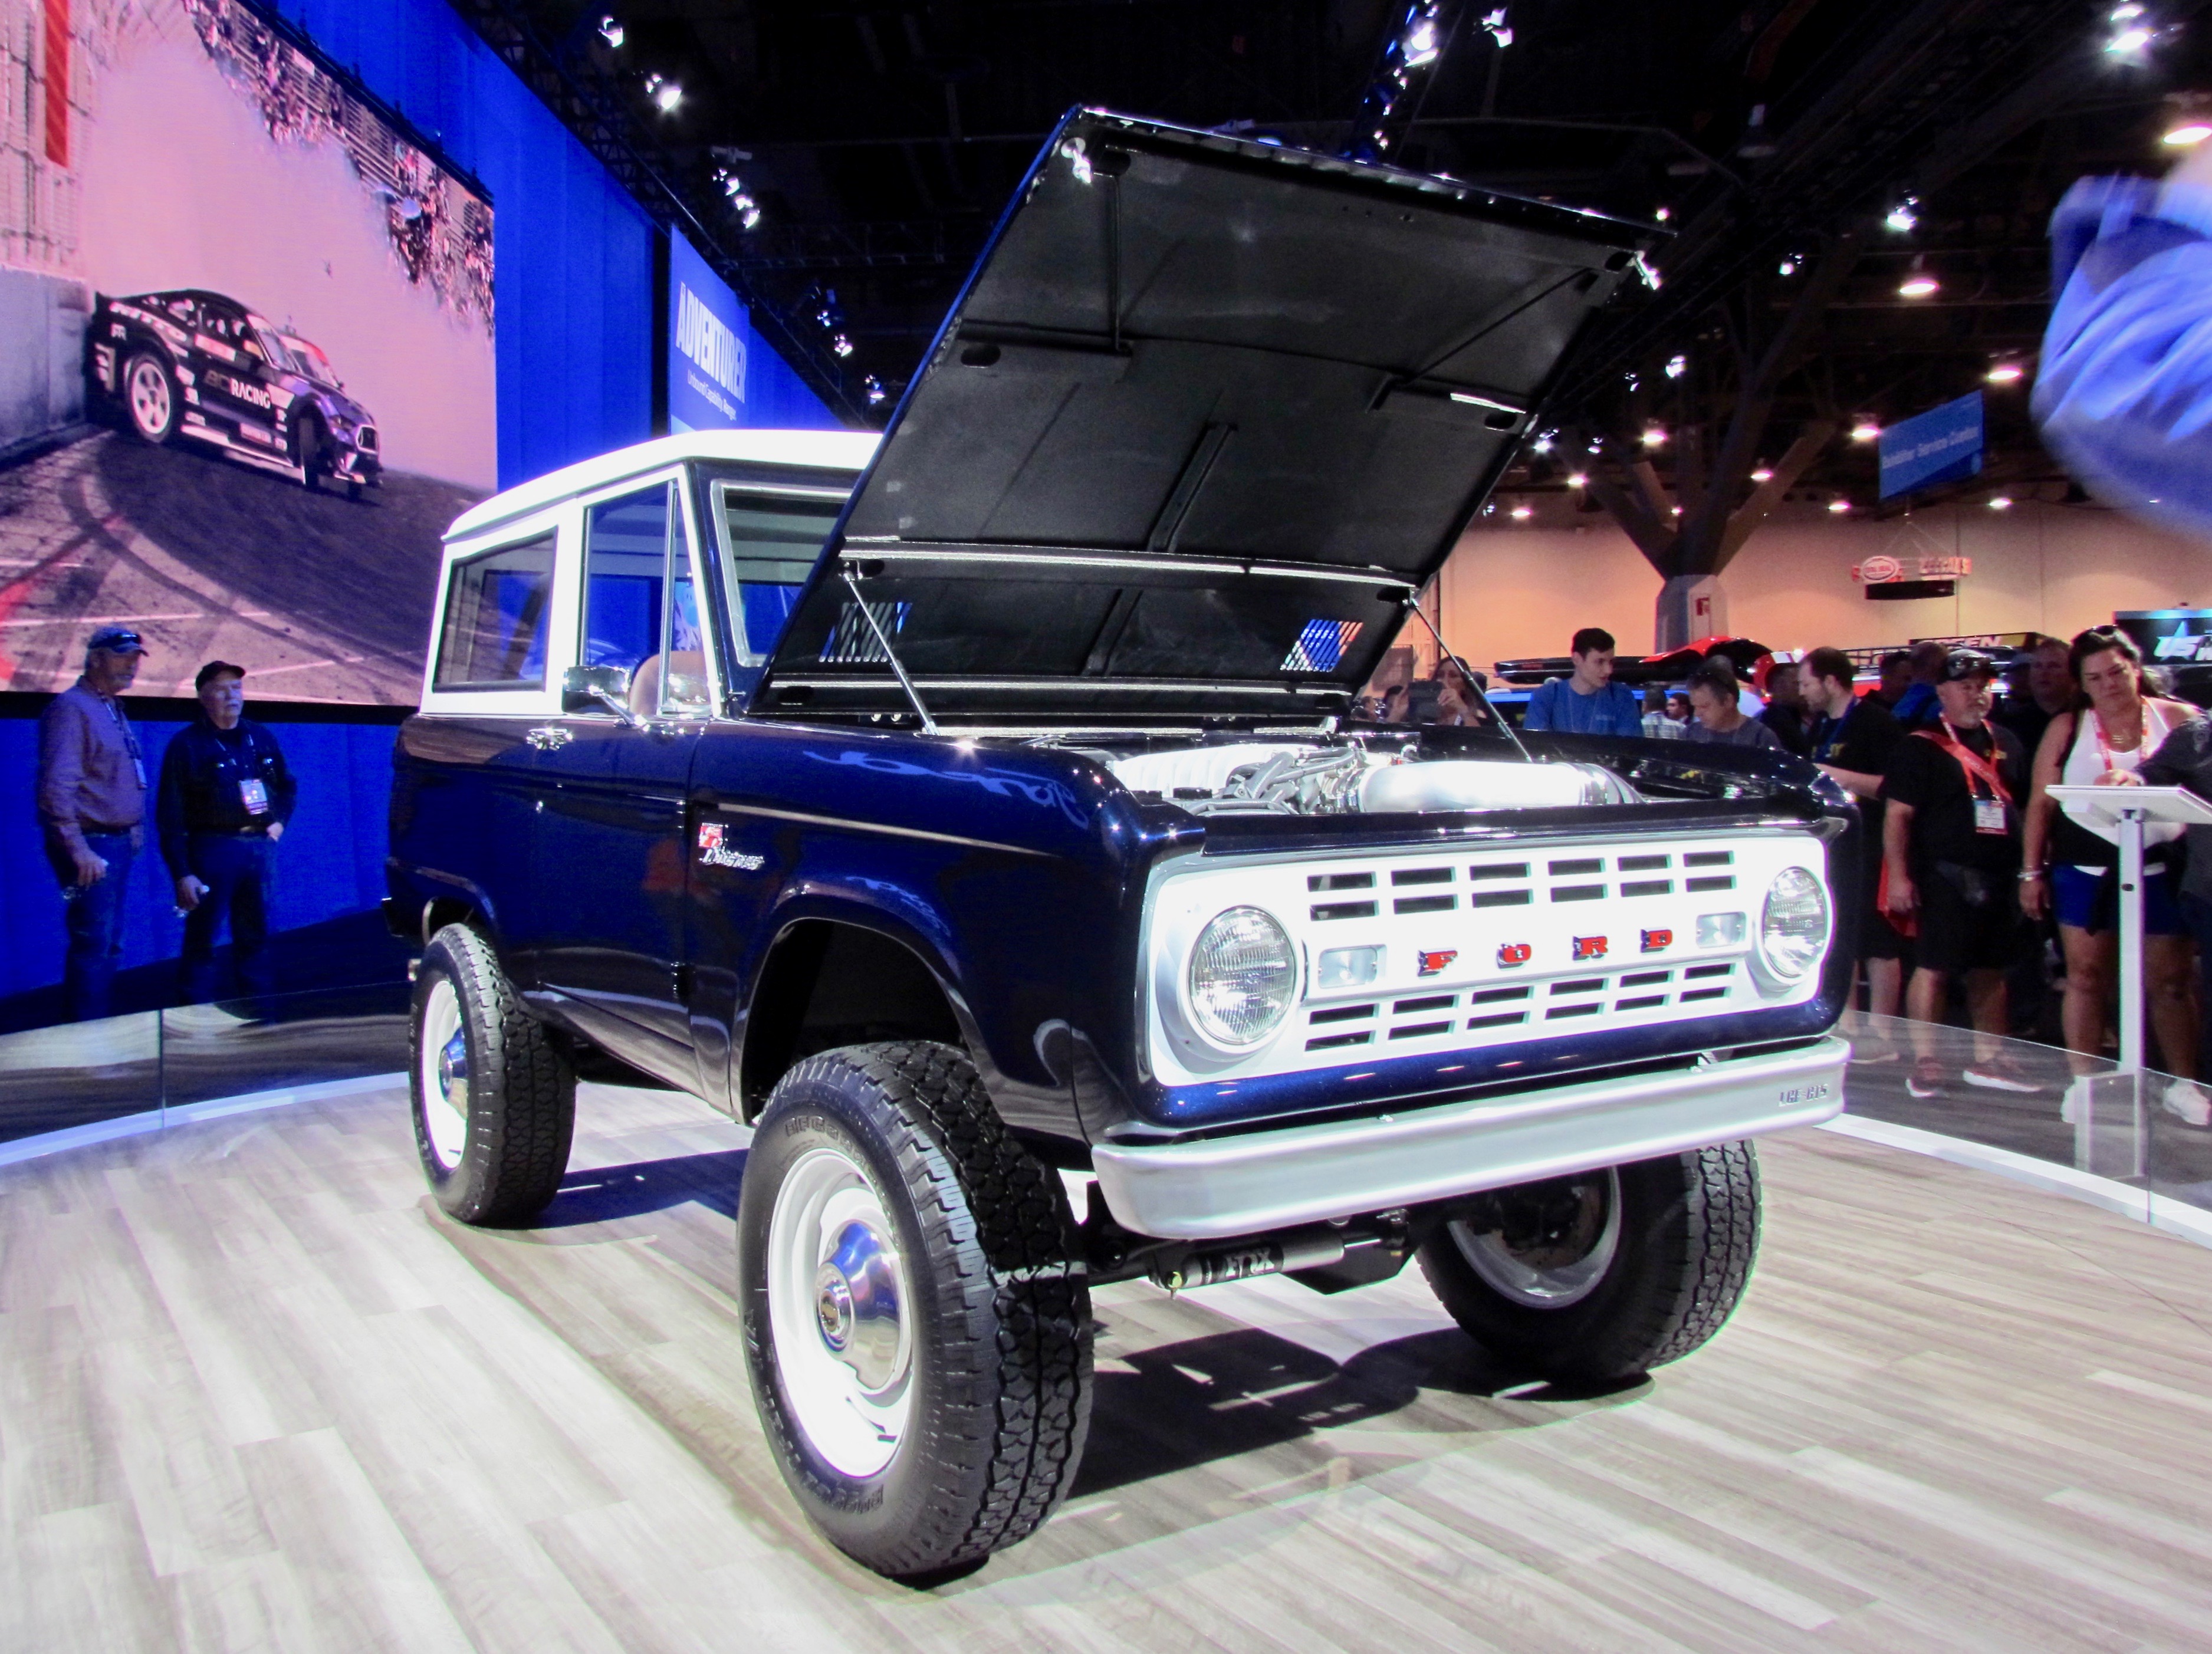 SEMA, Ford uses SEMA to heighten anticipation of new Bronco, ClassicCars.com Journal